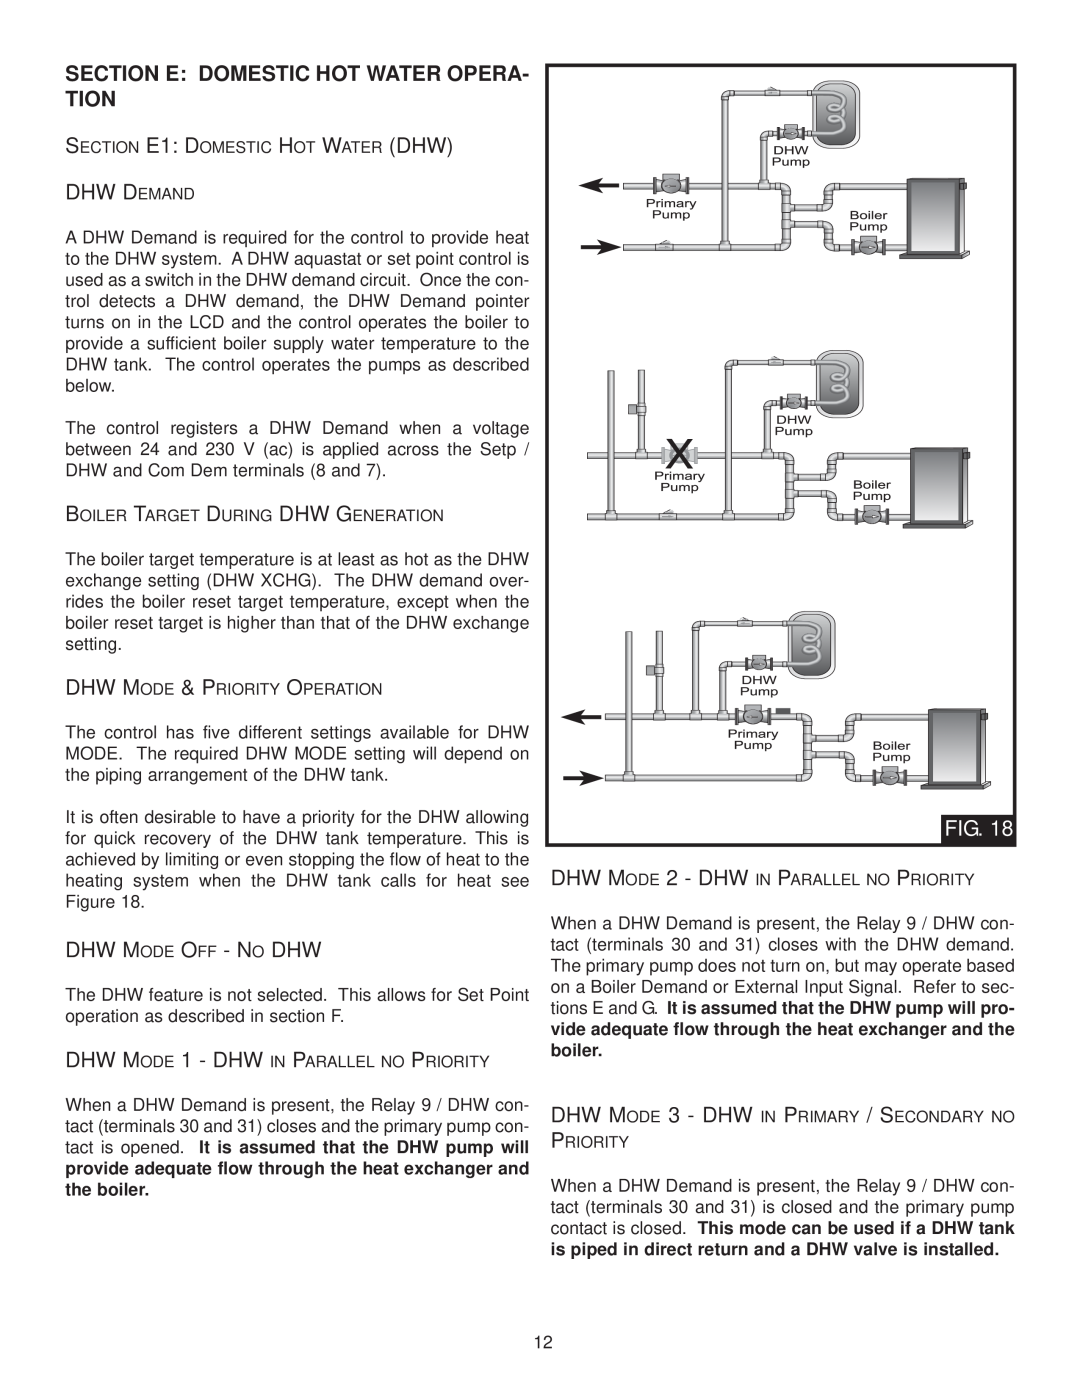 Lochinvar MP2, INS7141, INS7162, TST2313 Section E Domestic Hot Water Opera- Tion, Dhw Demand, Dhw Mode Off - No Dhw 